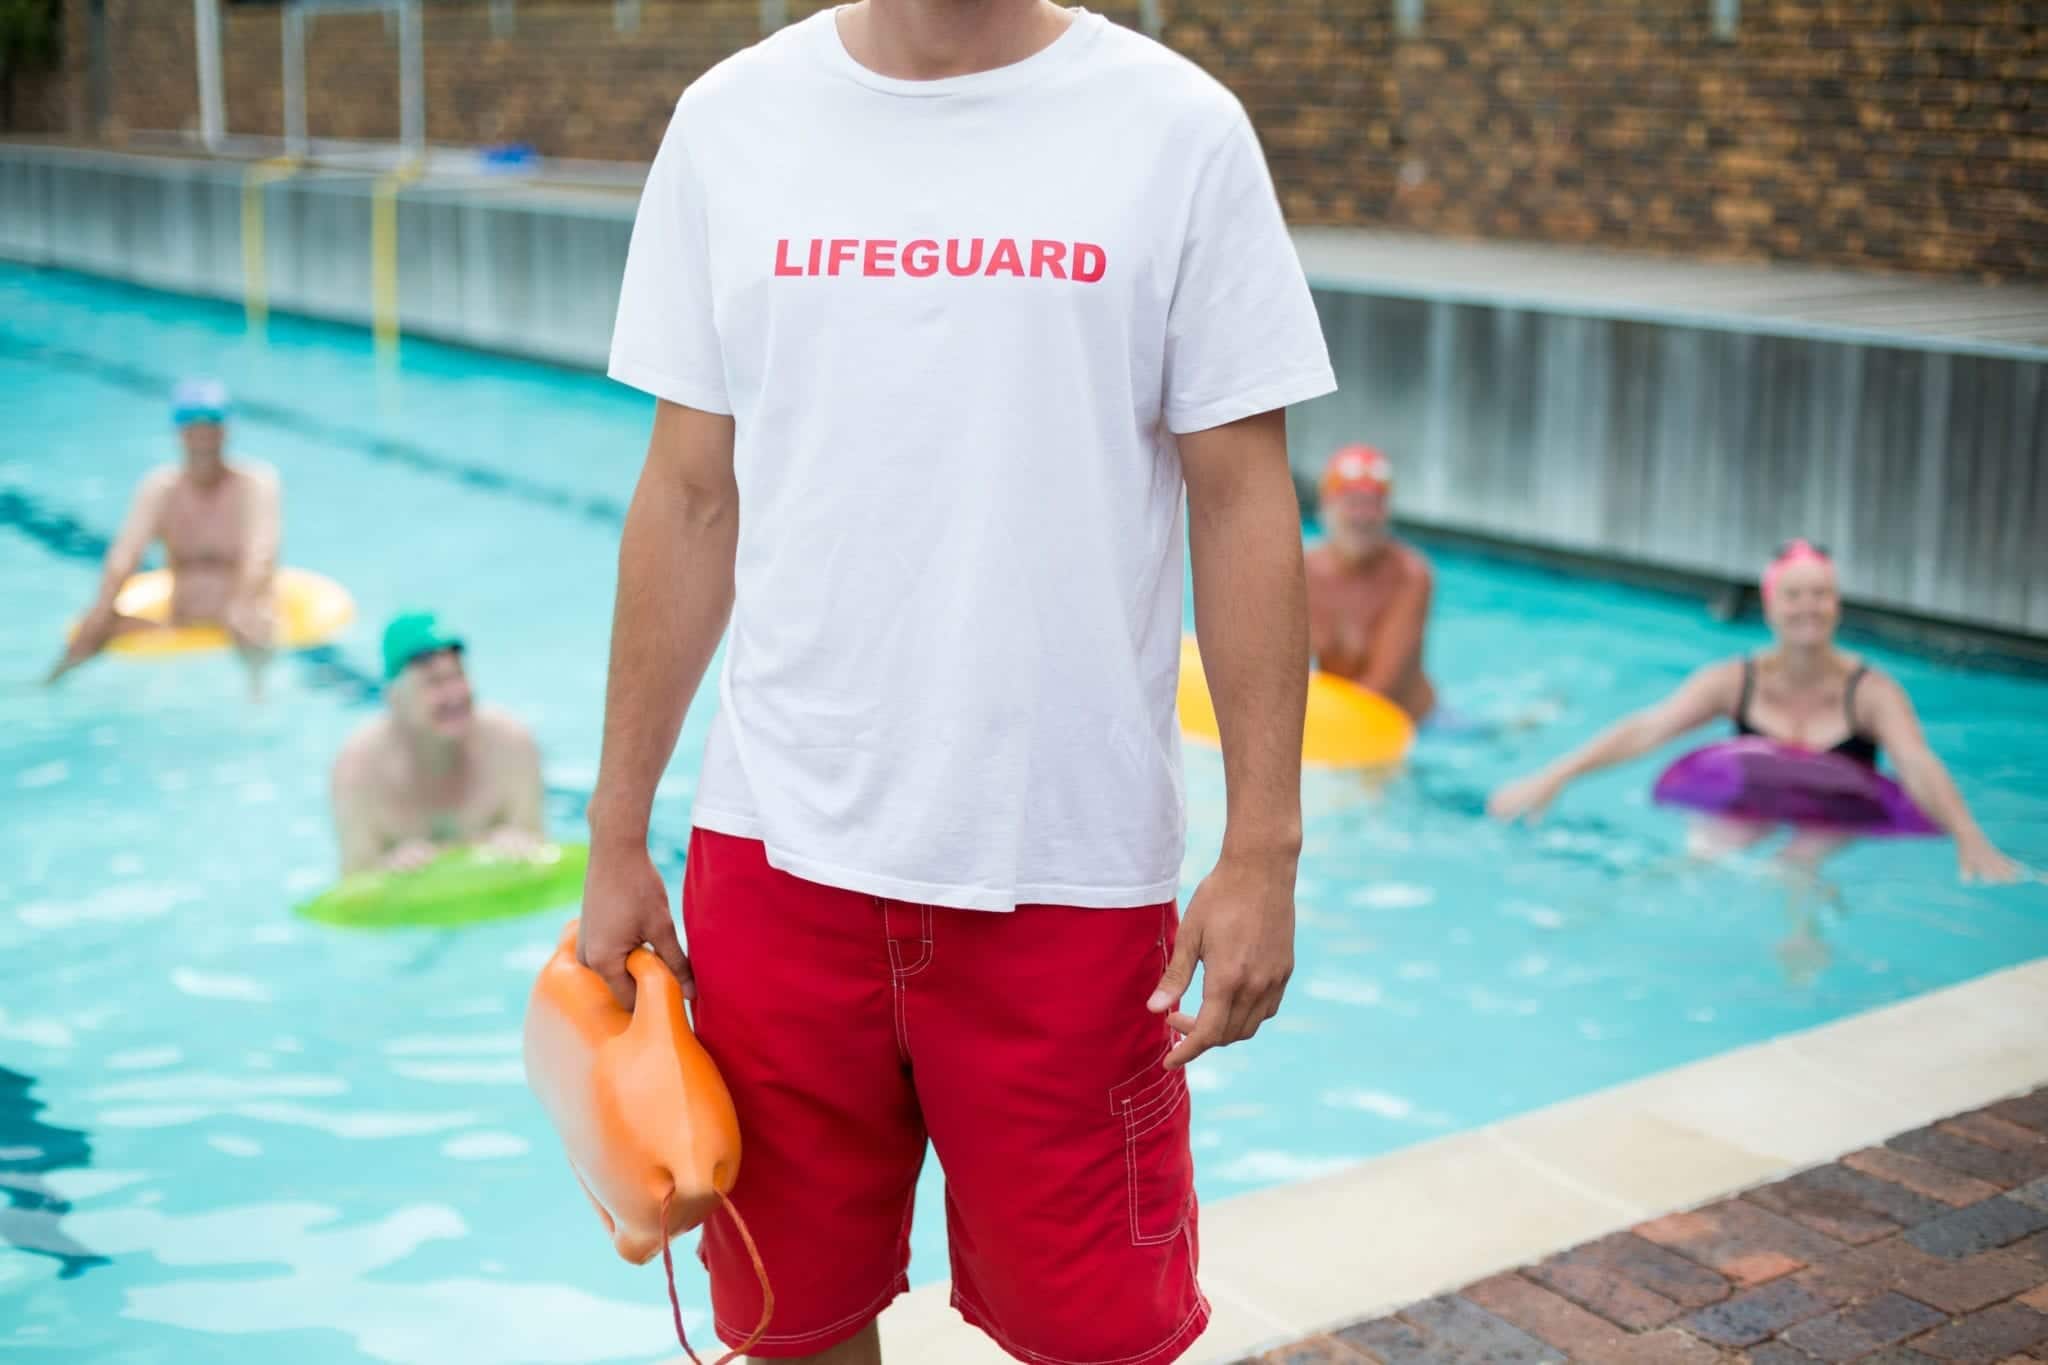 Florida Premise Liability Rules Usually Apply to Pool Injuries